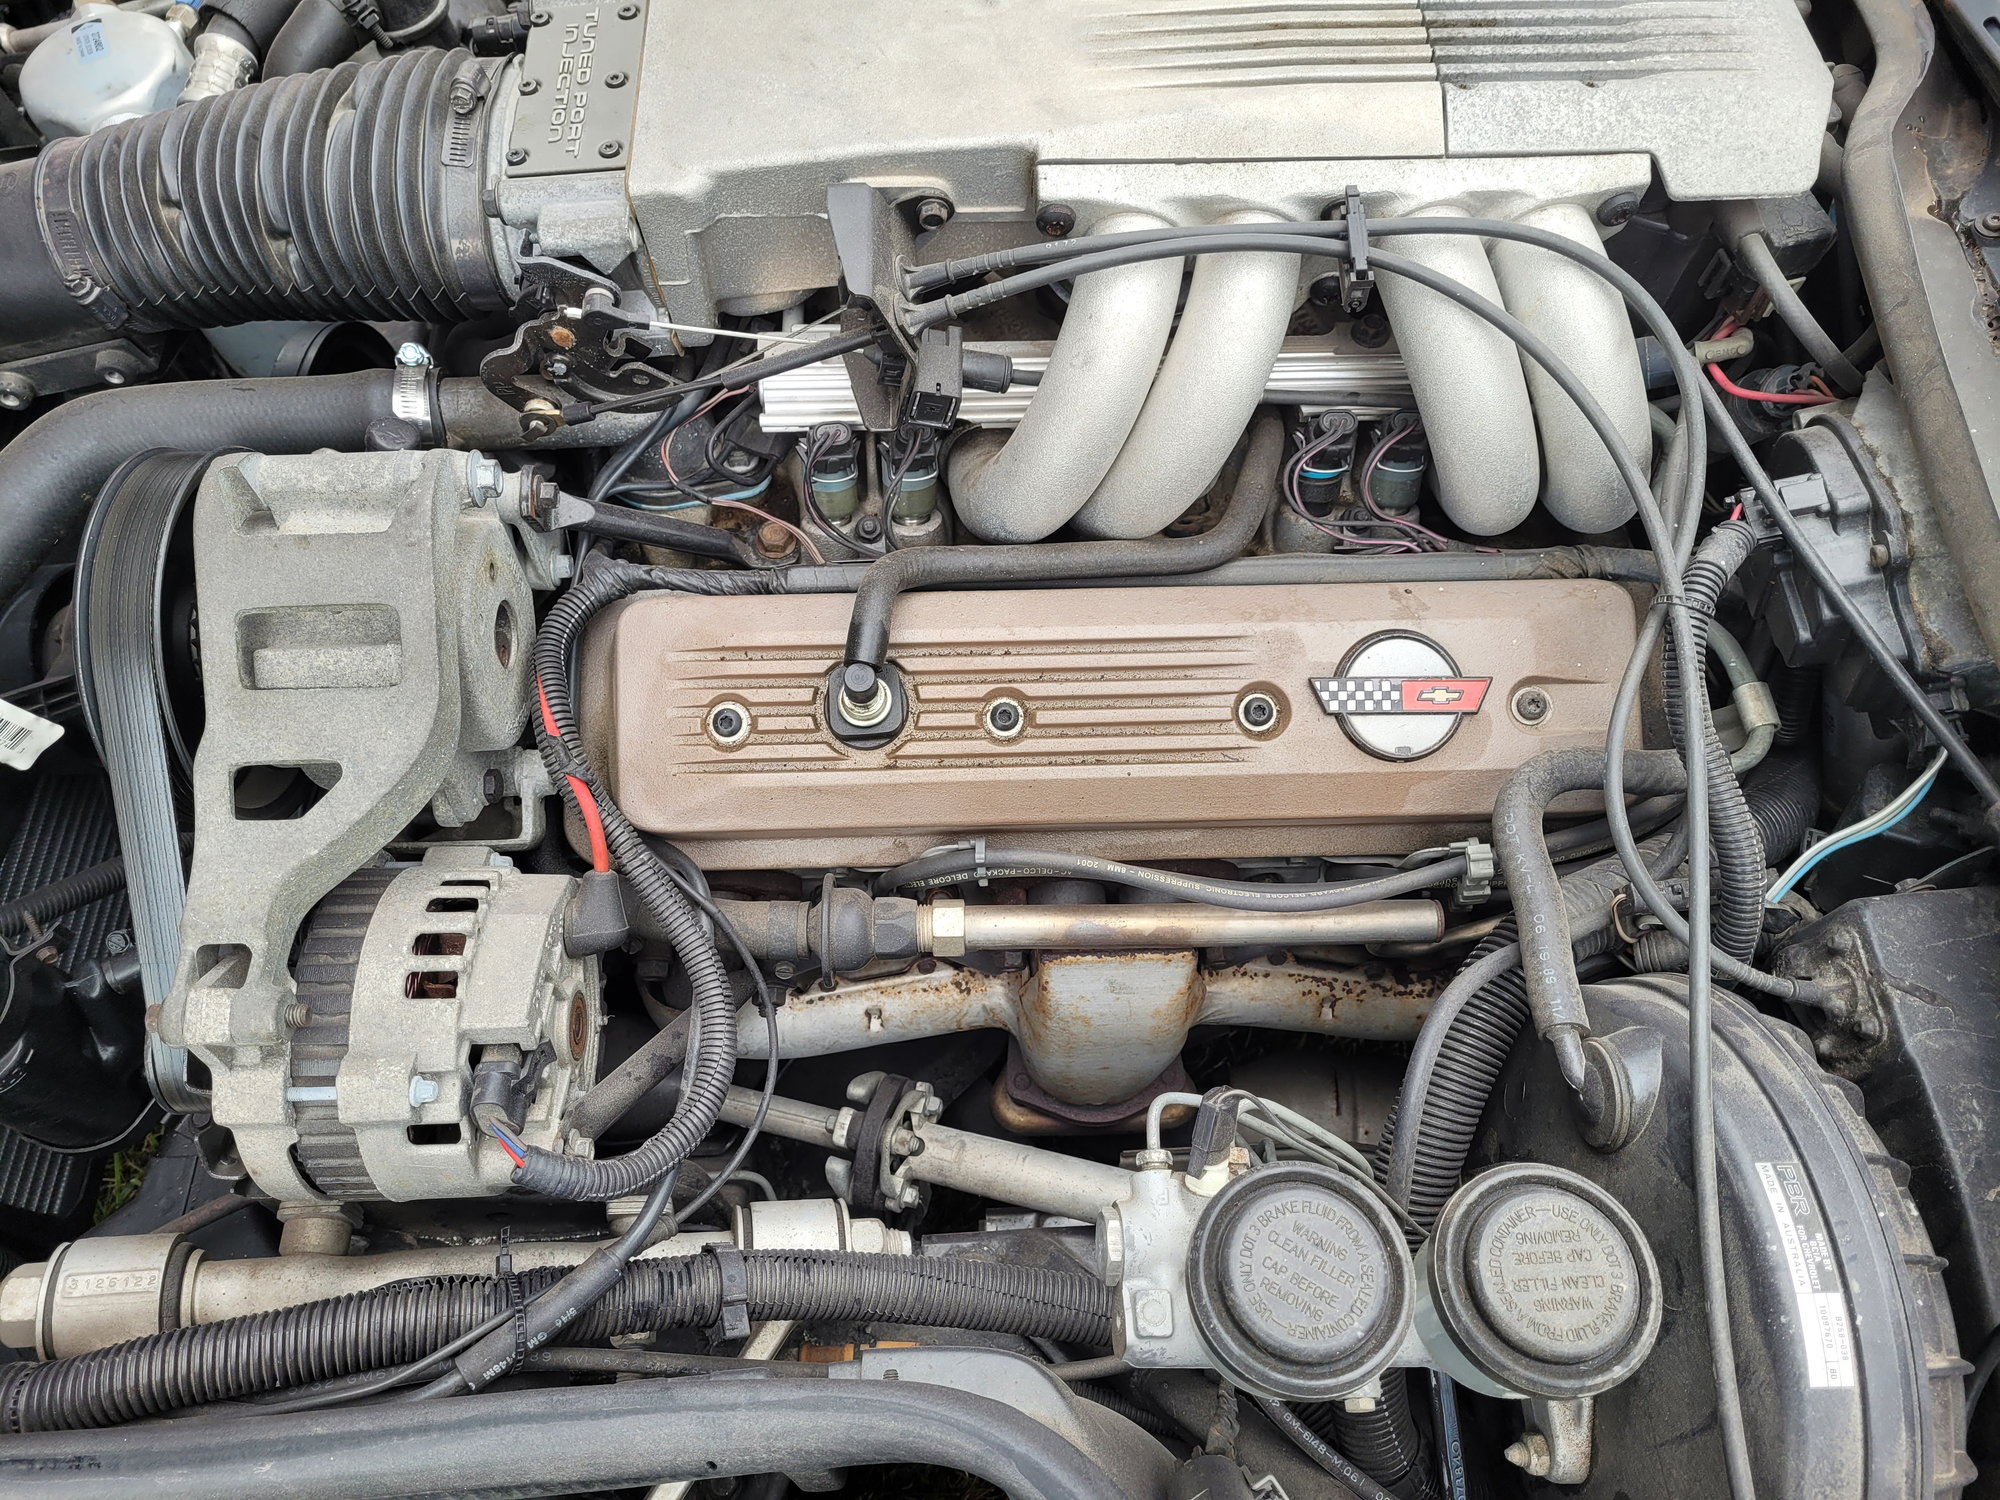 Tip: What does an engine cleaner actually do?